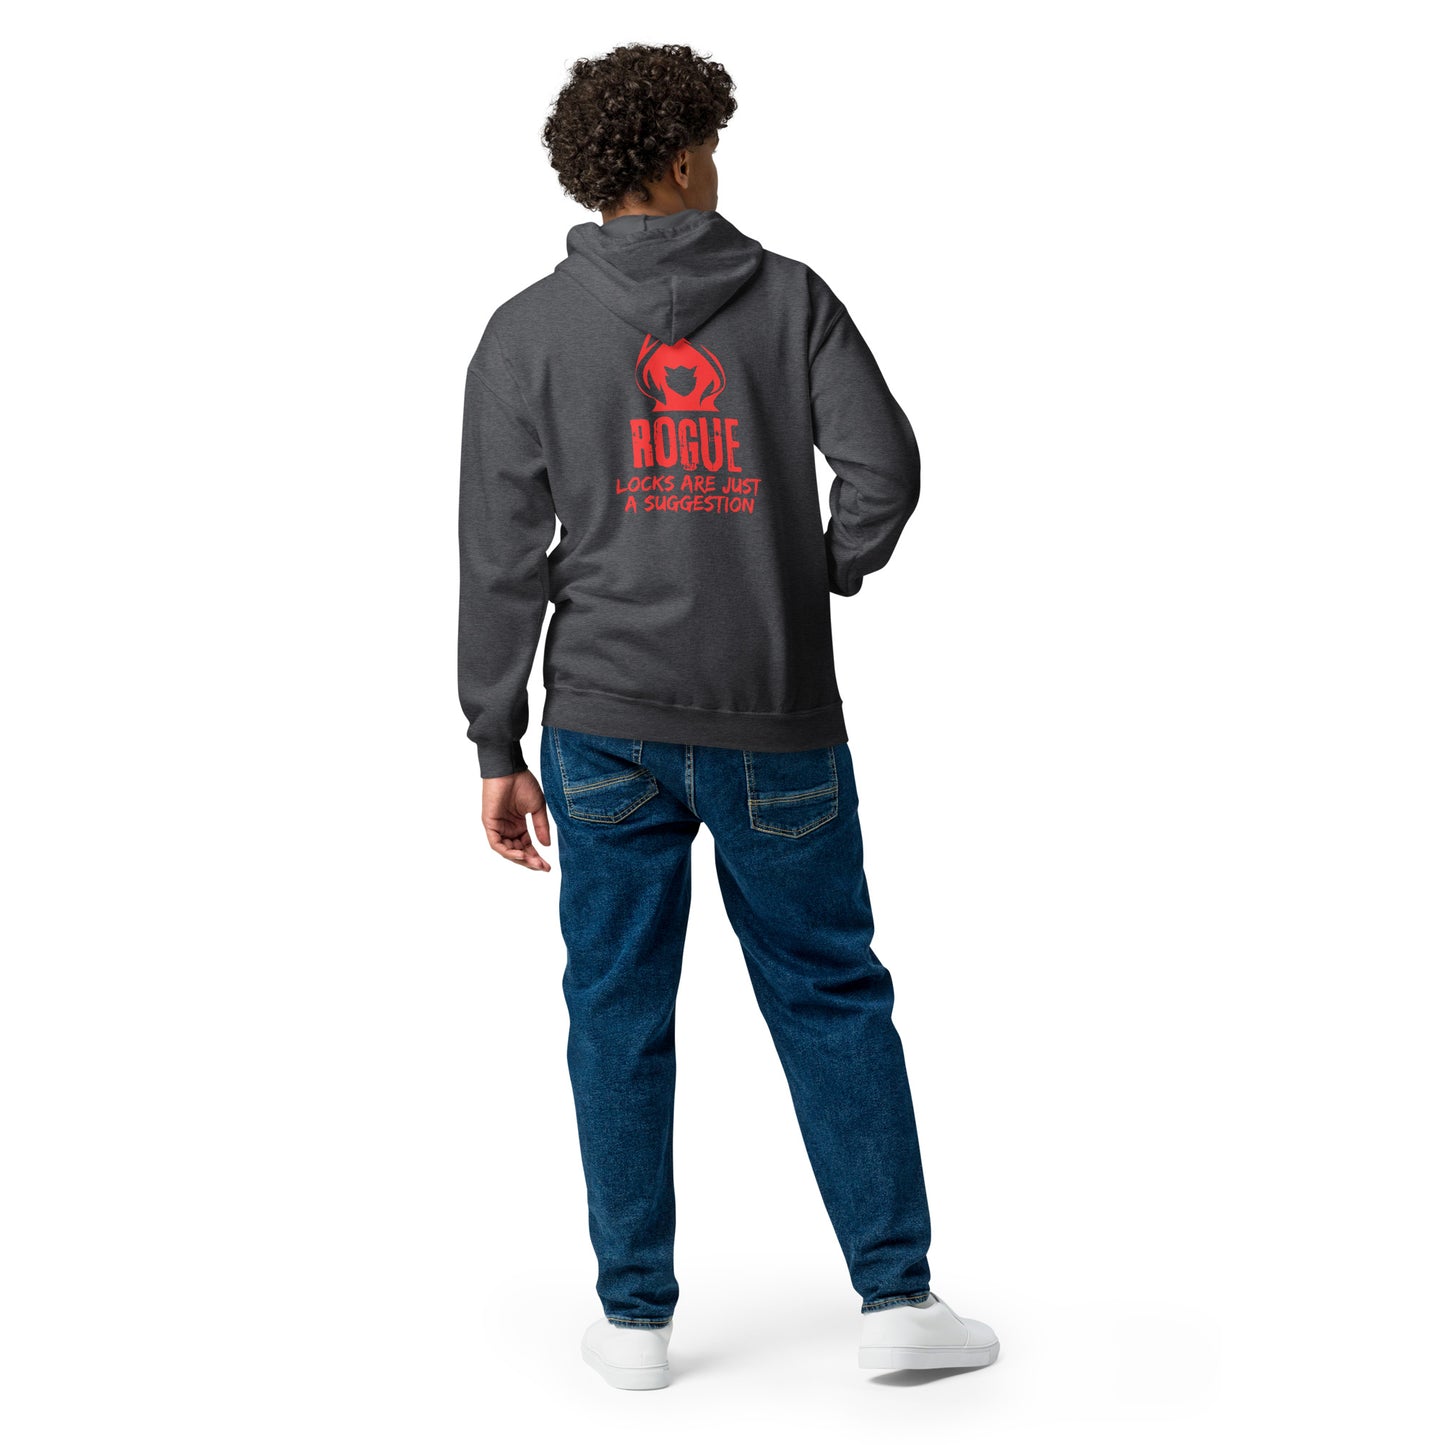 Locks are just a suggestion - Rogue D&D Unisex heavy blend zip hoodie